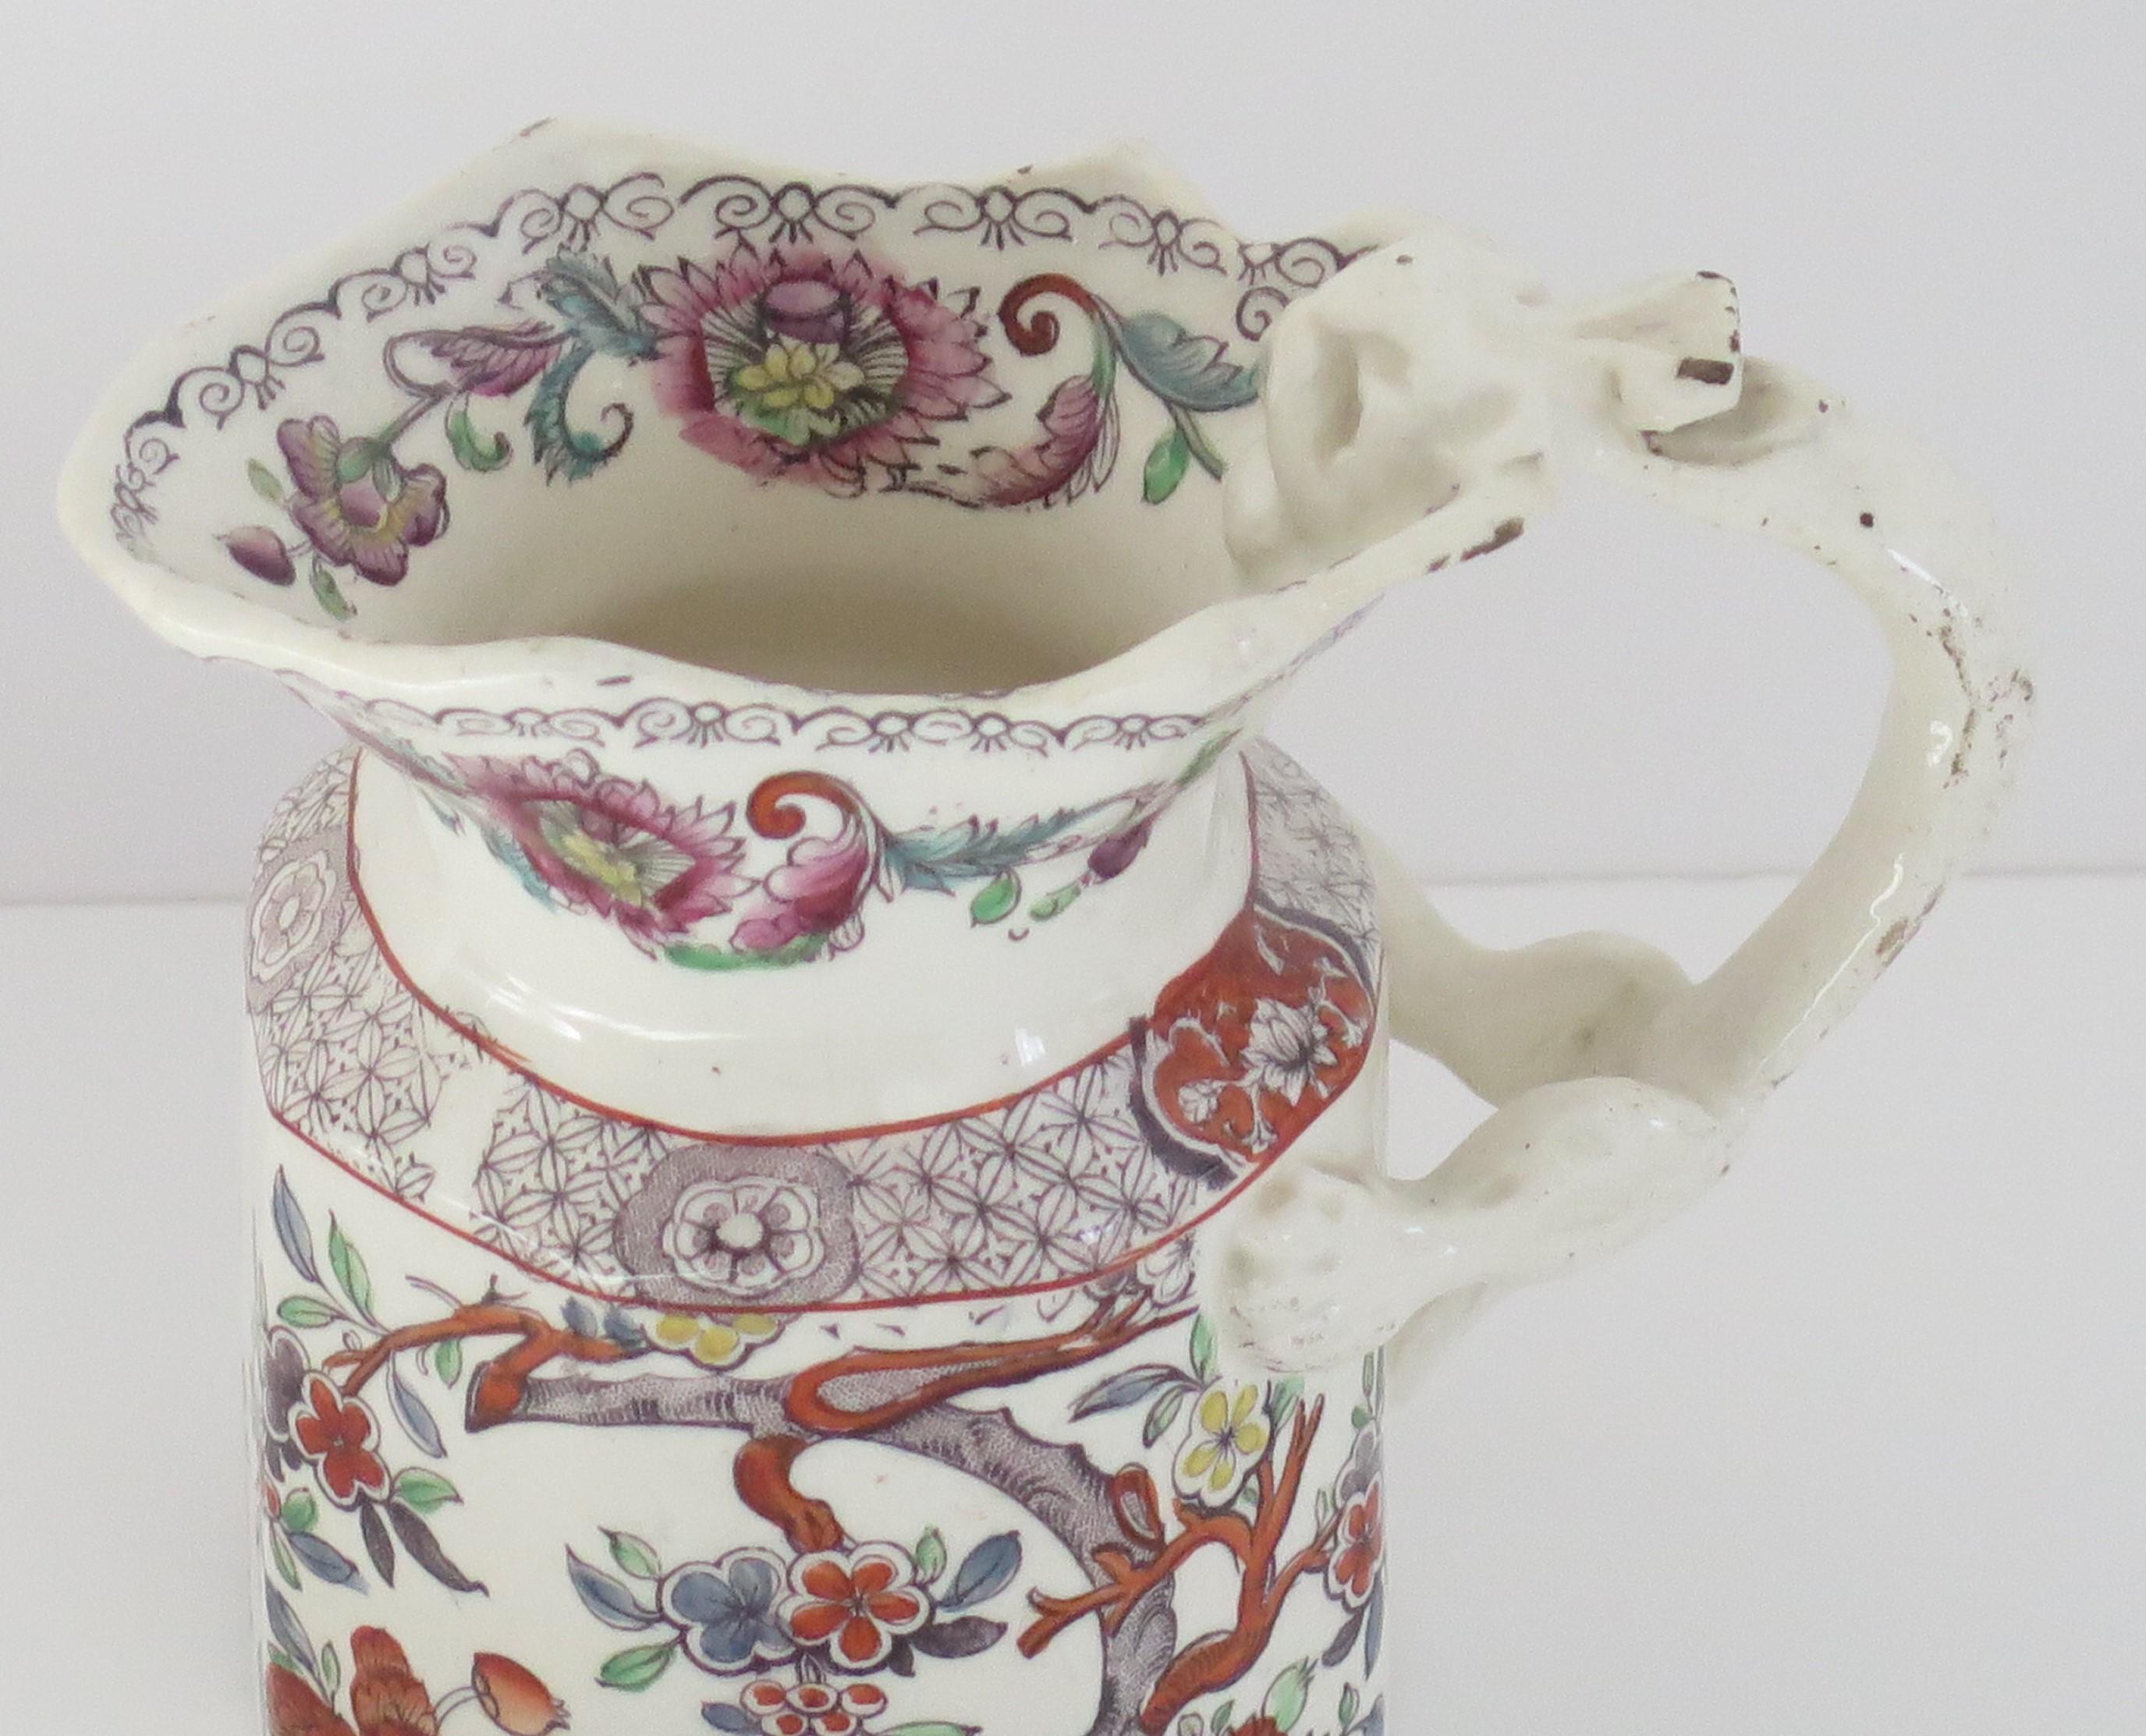 Rare Mason's Ironstone Fenton Jug or pitcher in Tree Peony Pattern, Circa 1840 In Good Condition For Sale In Lincoln, Lincolnshire